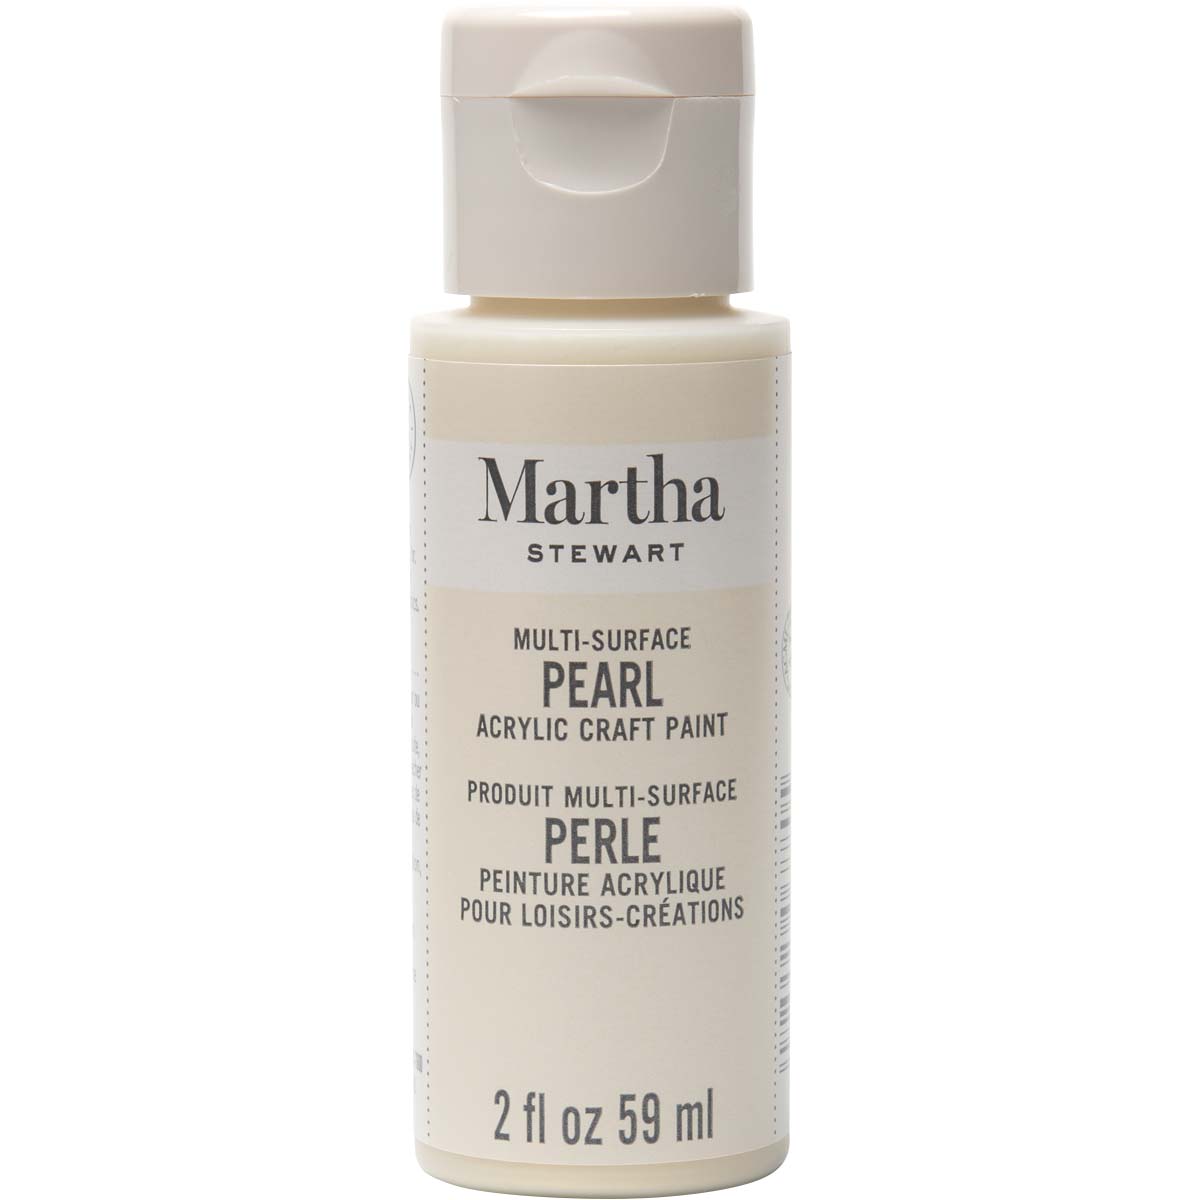 Martha Stewart ® Multi-Surface Pearl Acrylic Craft Paint - Gold Mother of Pearl, 2 oz. - 33515CA